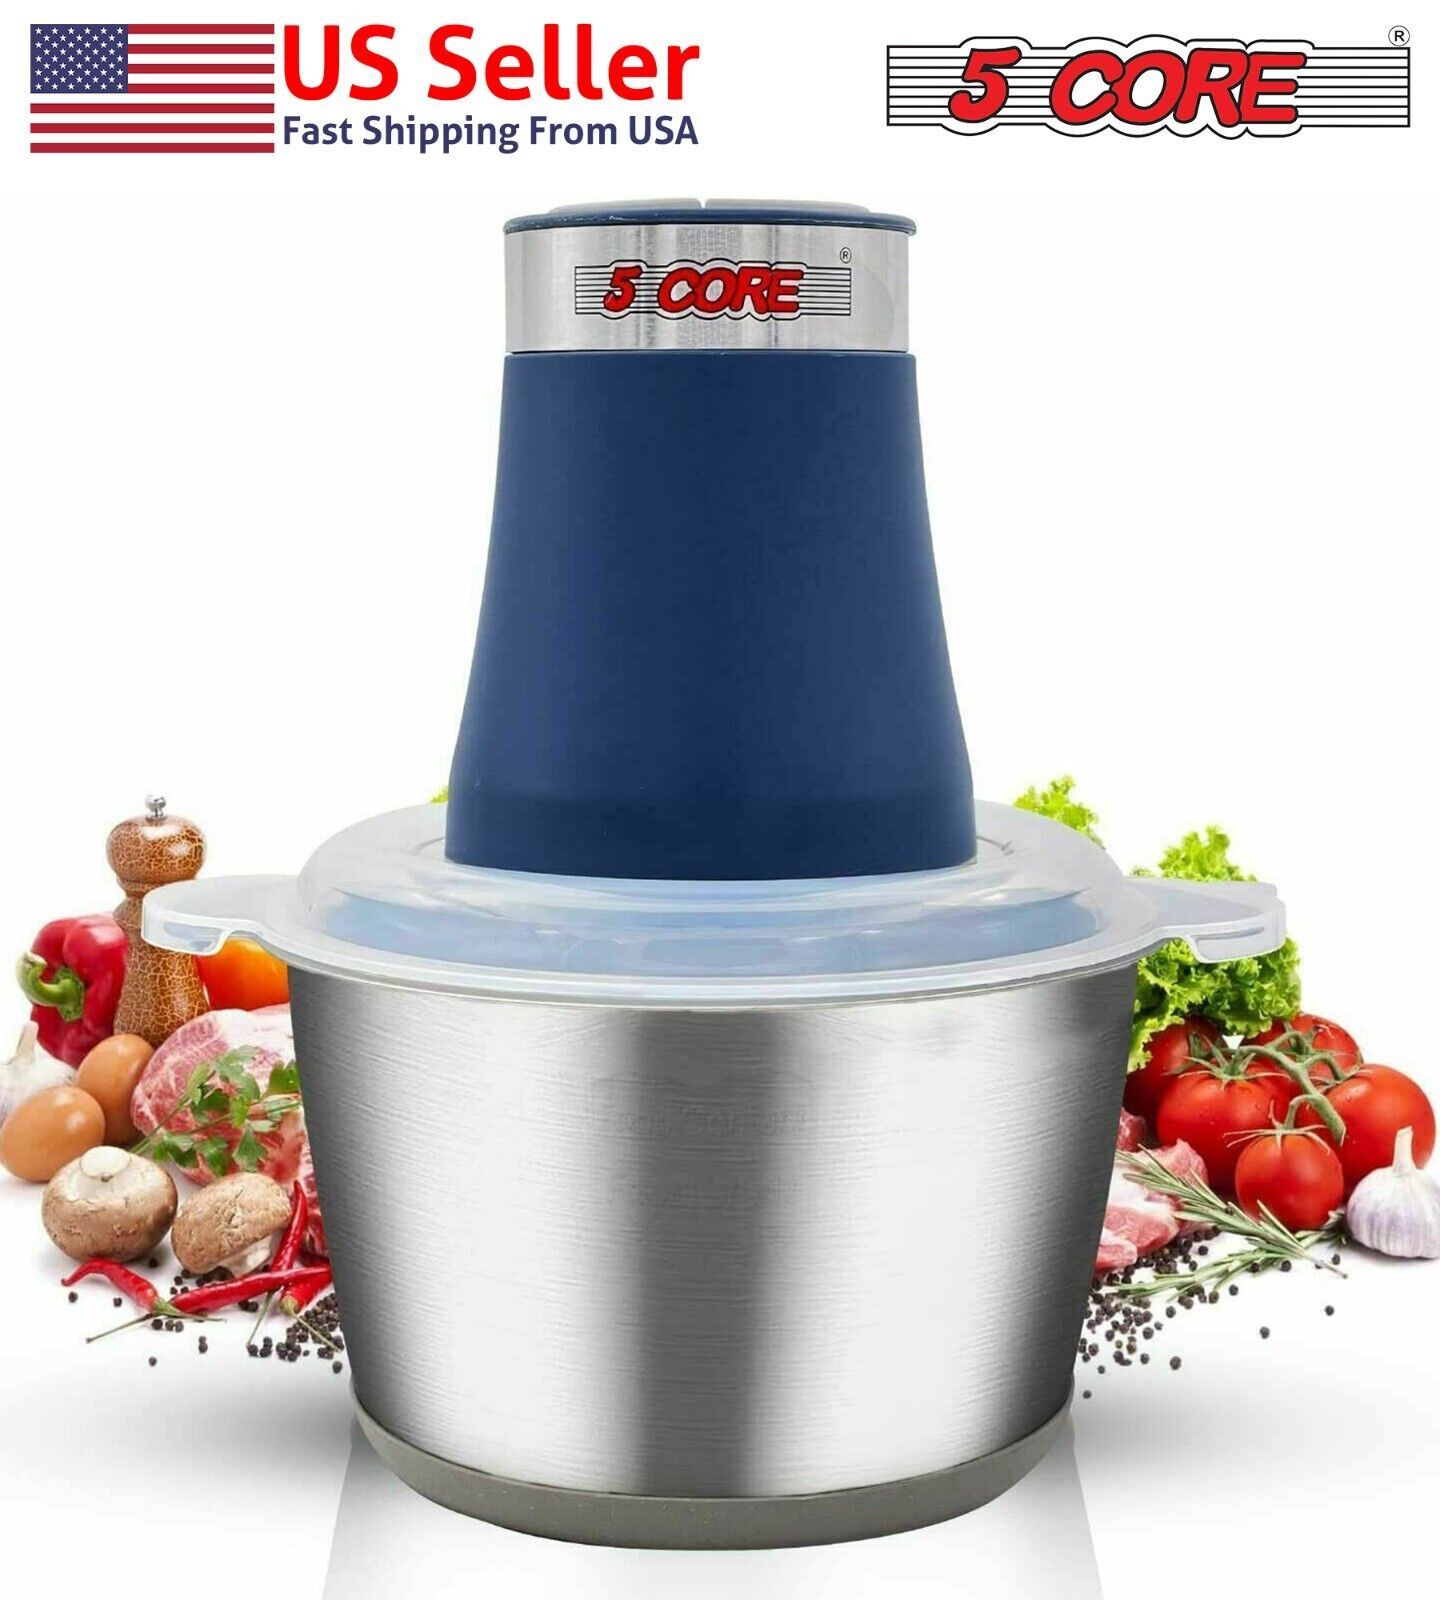 Primary image for 5Core XElectric Meat Grinder 2L Vegetable Food Process 300W Stainless Steel Bowl